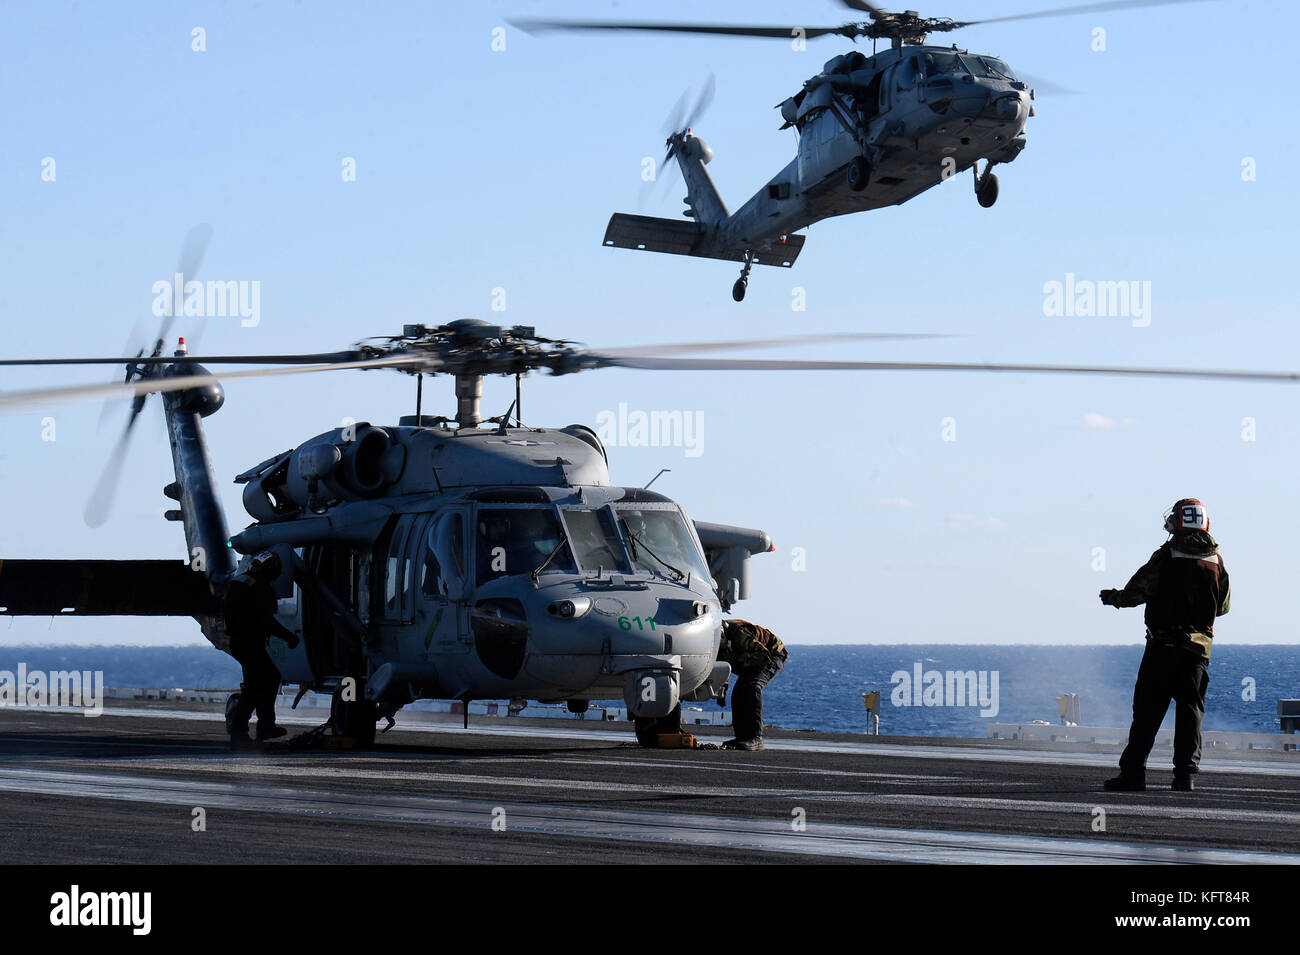 MH-60S Sea Hawk helicopter Stock Photo